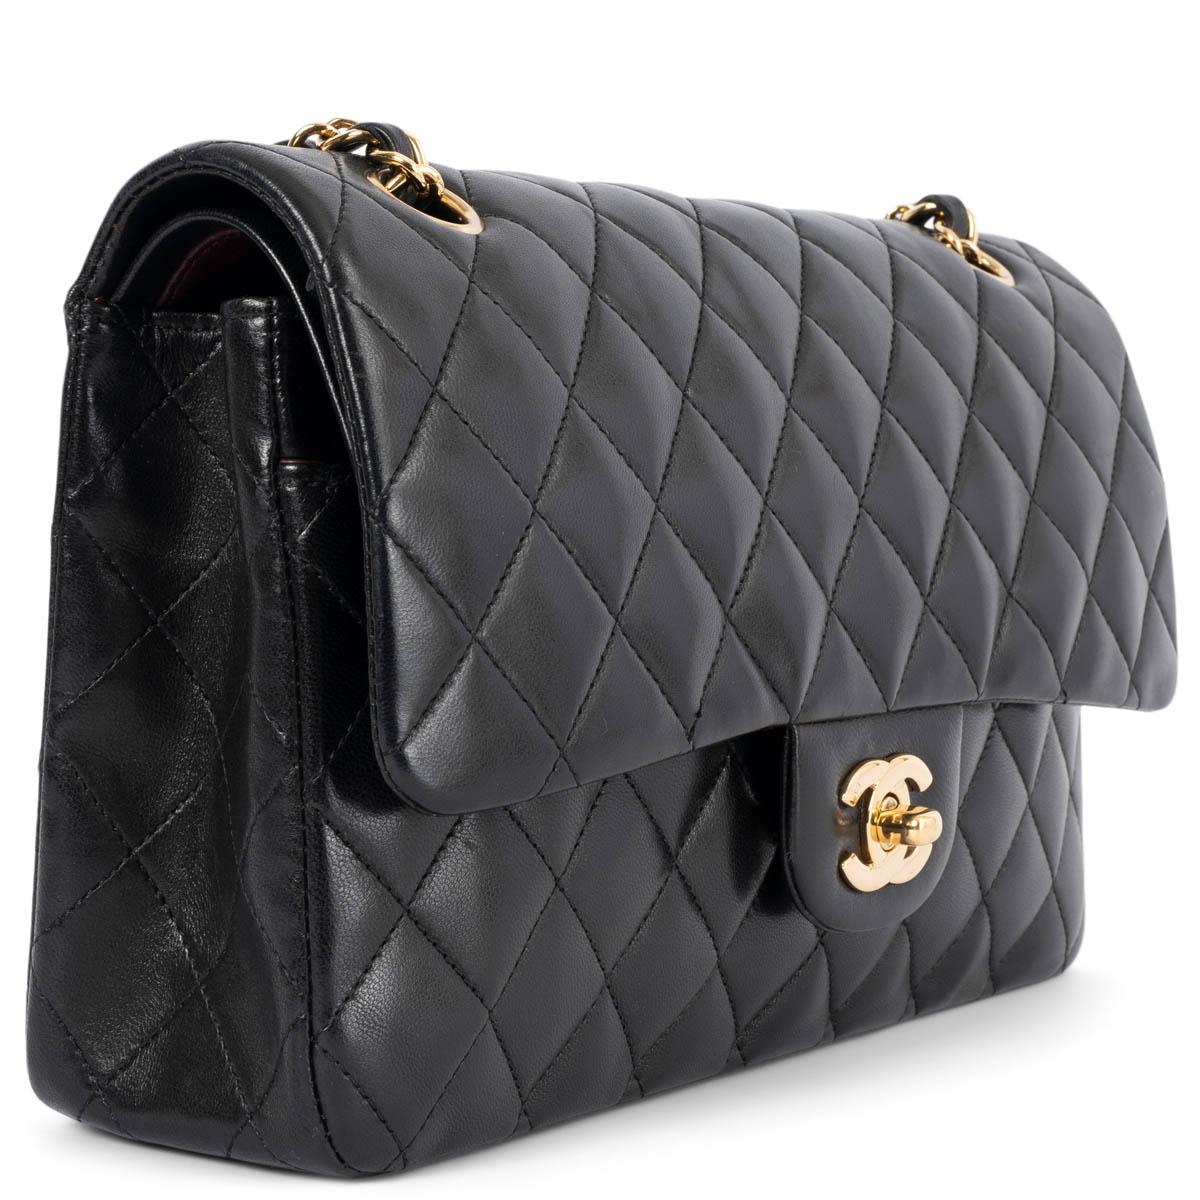 100% authentic Chanel Classic Medium Timeless Double Flap Bag in black lambskin featuring gold-tone hardware. Open pocket on the back. Closes with classic CC-turn-lock on the front. Zipper pocket inside the flap. Outside pocket on the front under